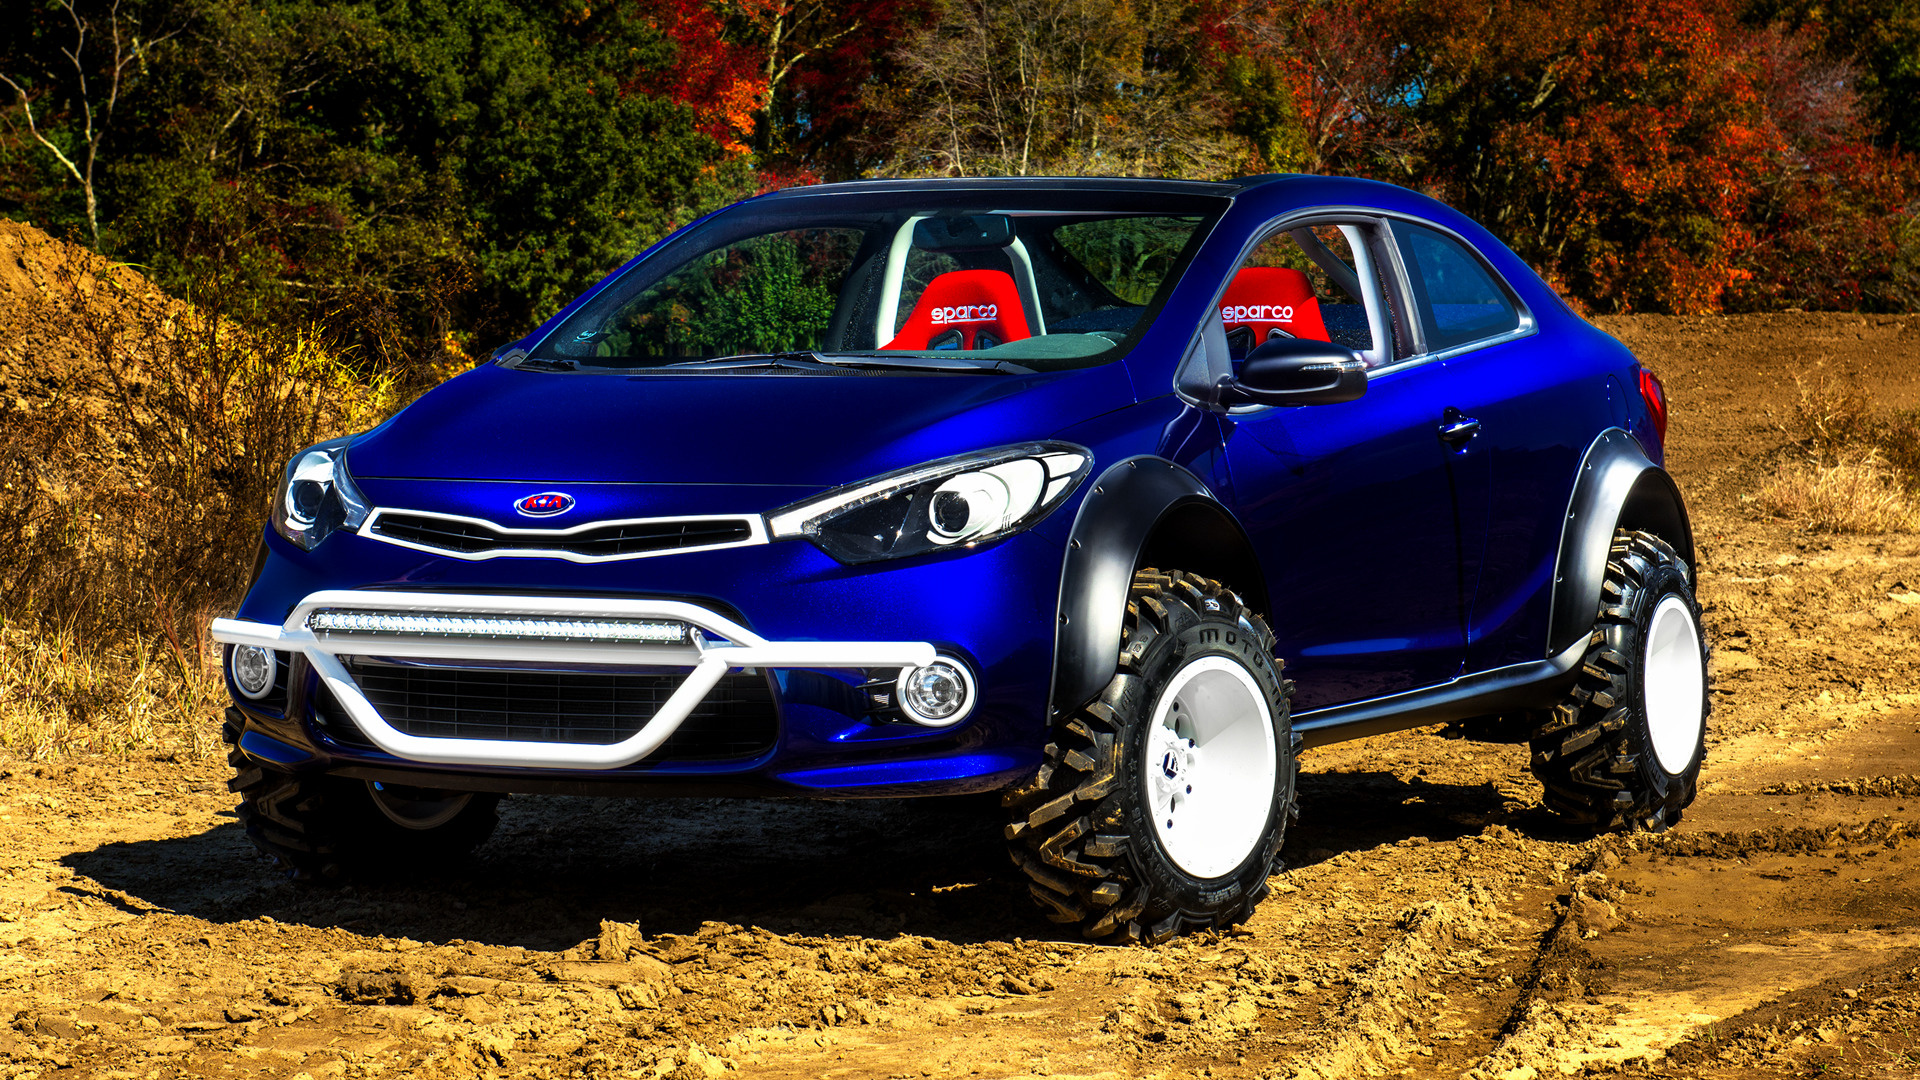 Kia Forte Koup Mud Bogger By Lux Motorwerks Compact Car Off Road Tuning Blue Car Car Coupe 1920x1080